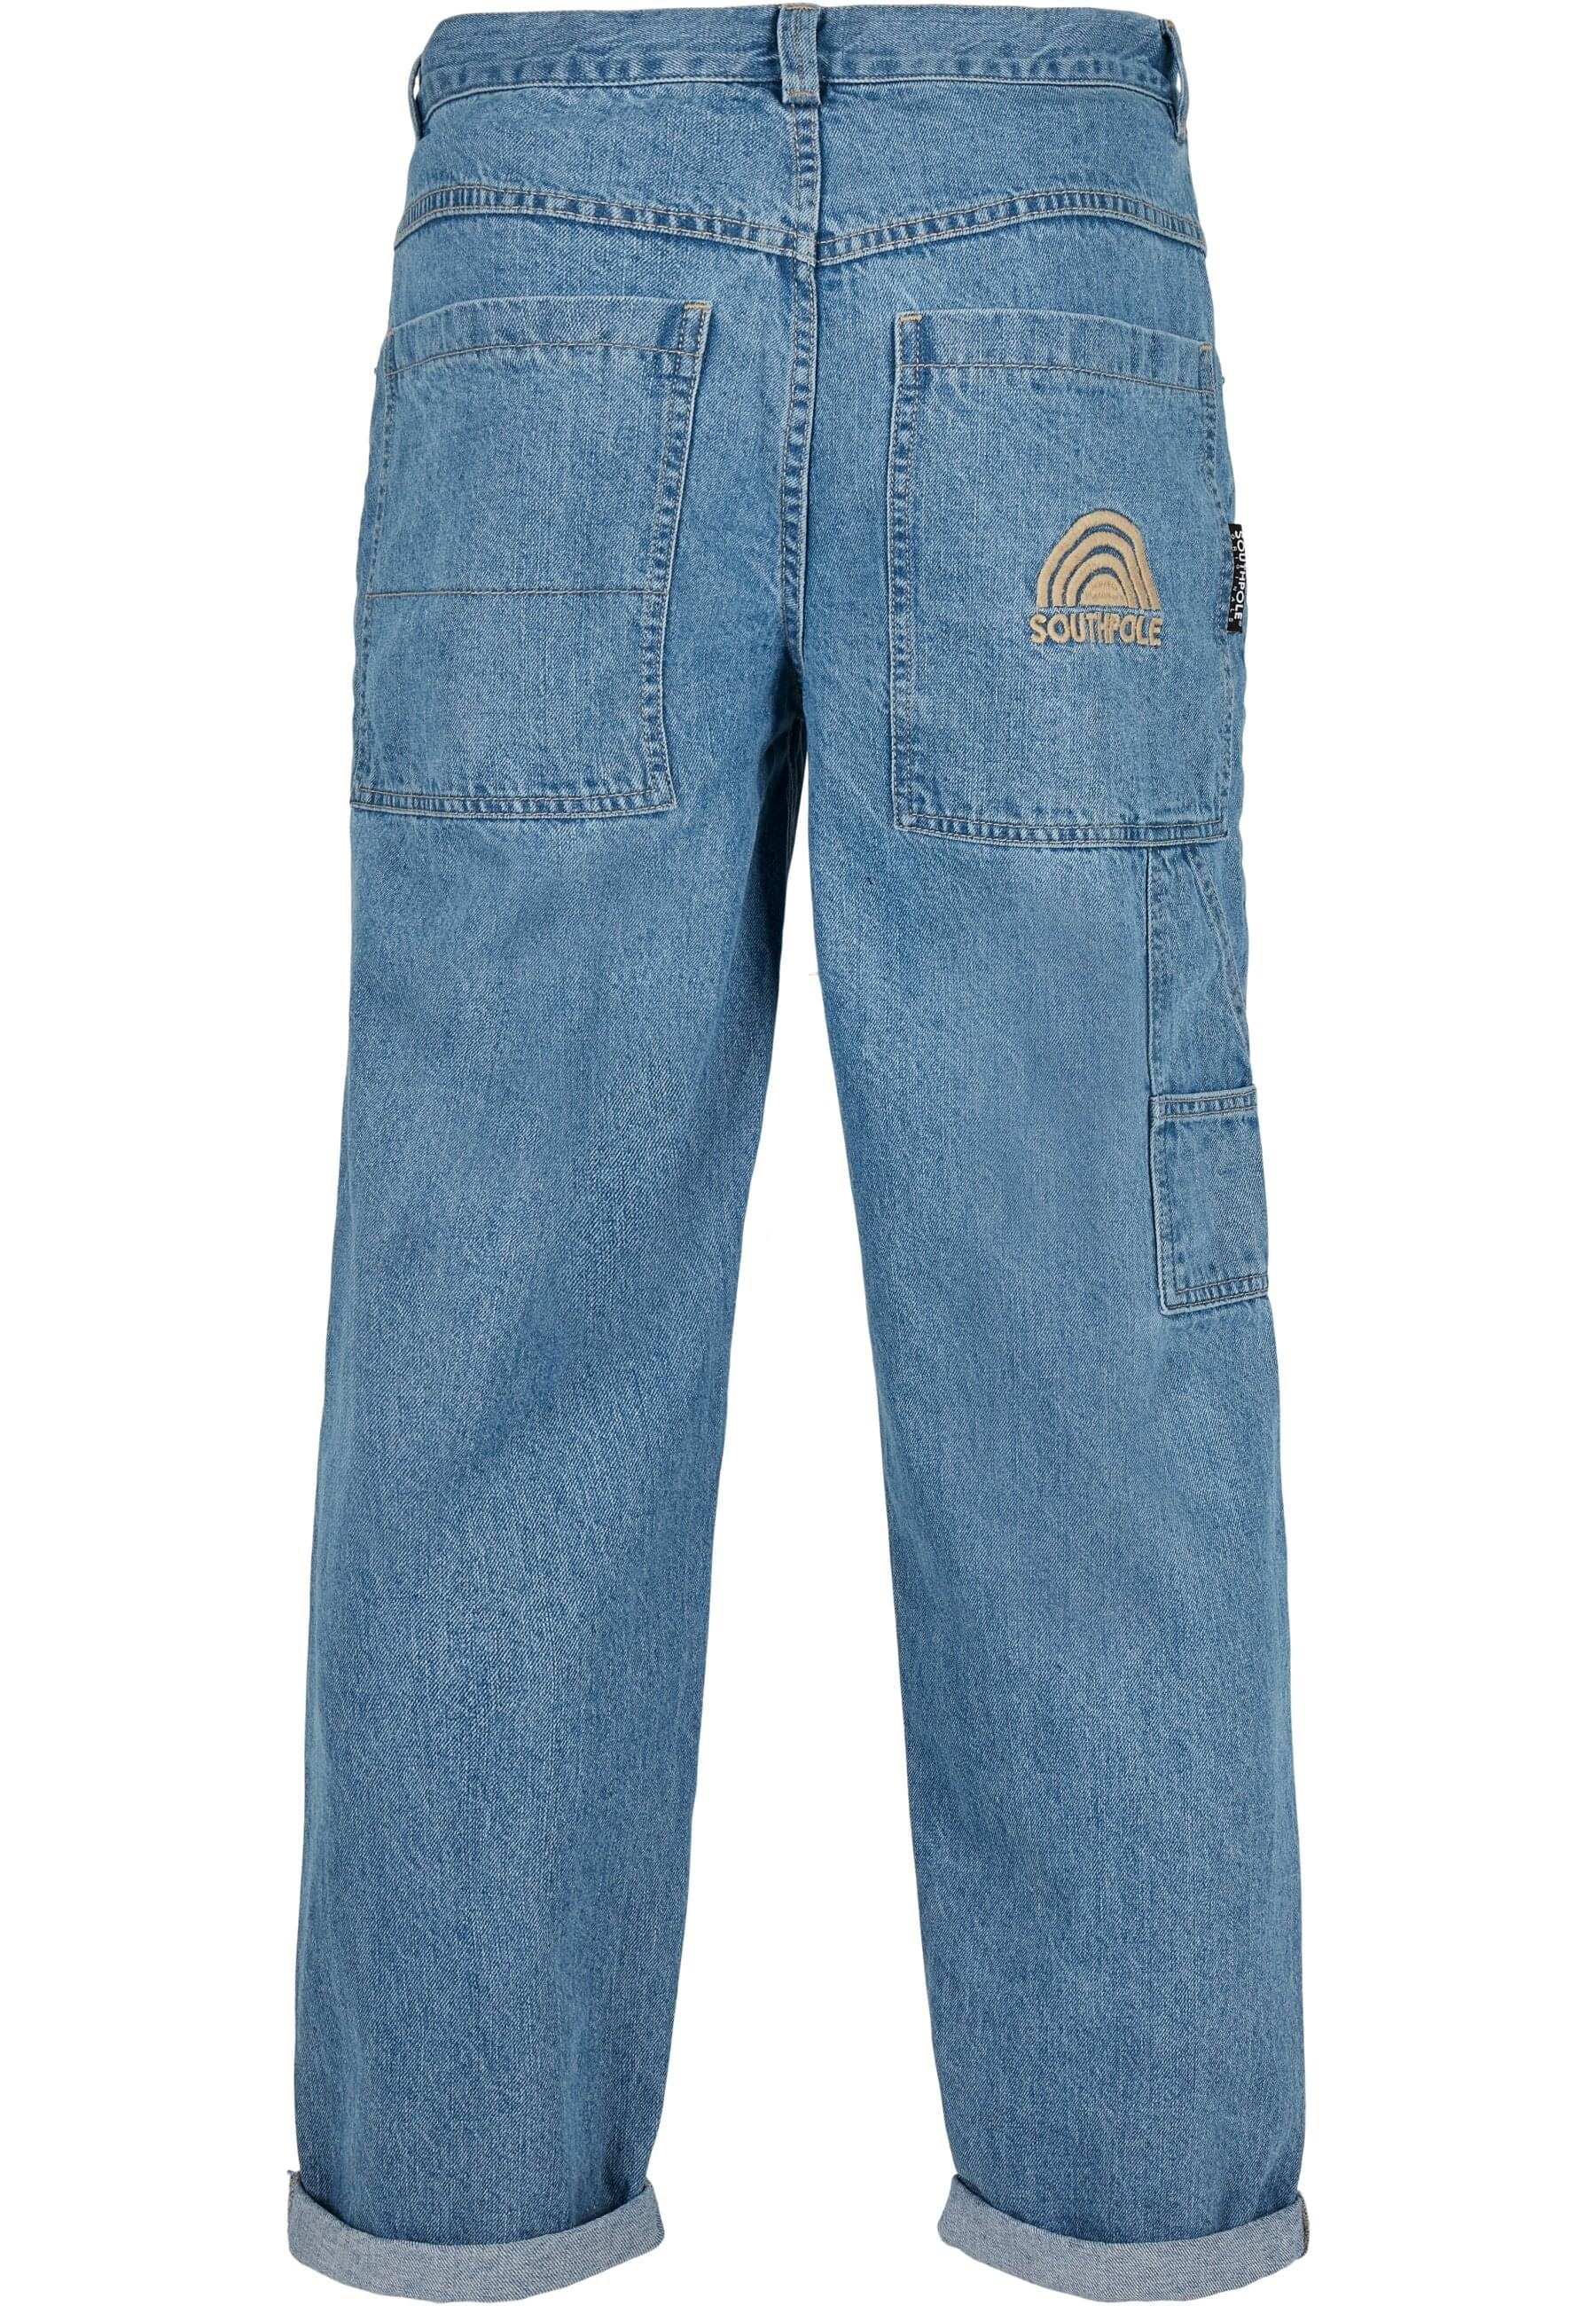 Southpole Bequeme Jeans »Southpole Herren Southpole Embroidery Denim«, (1 tlg.)